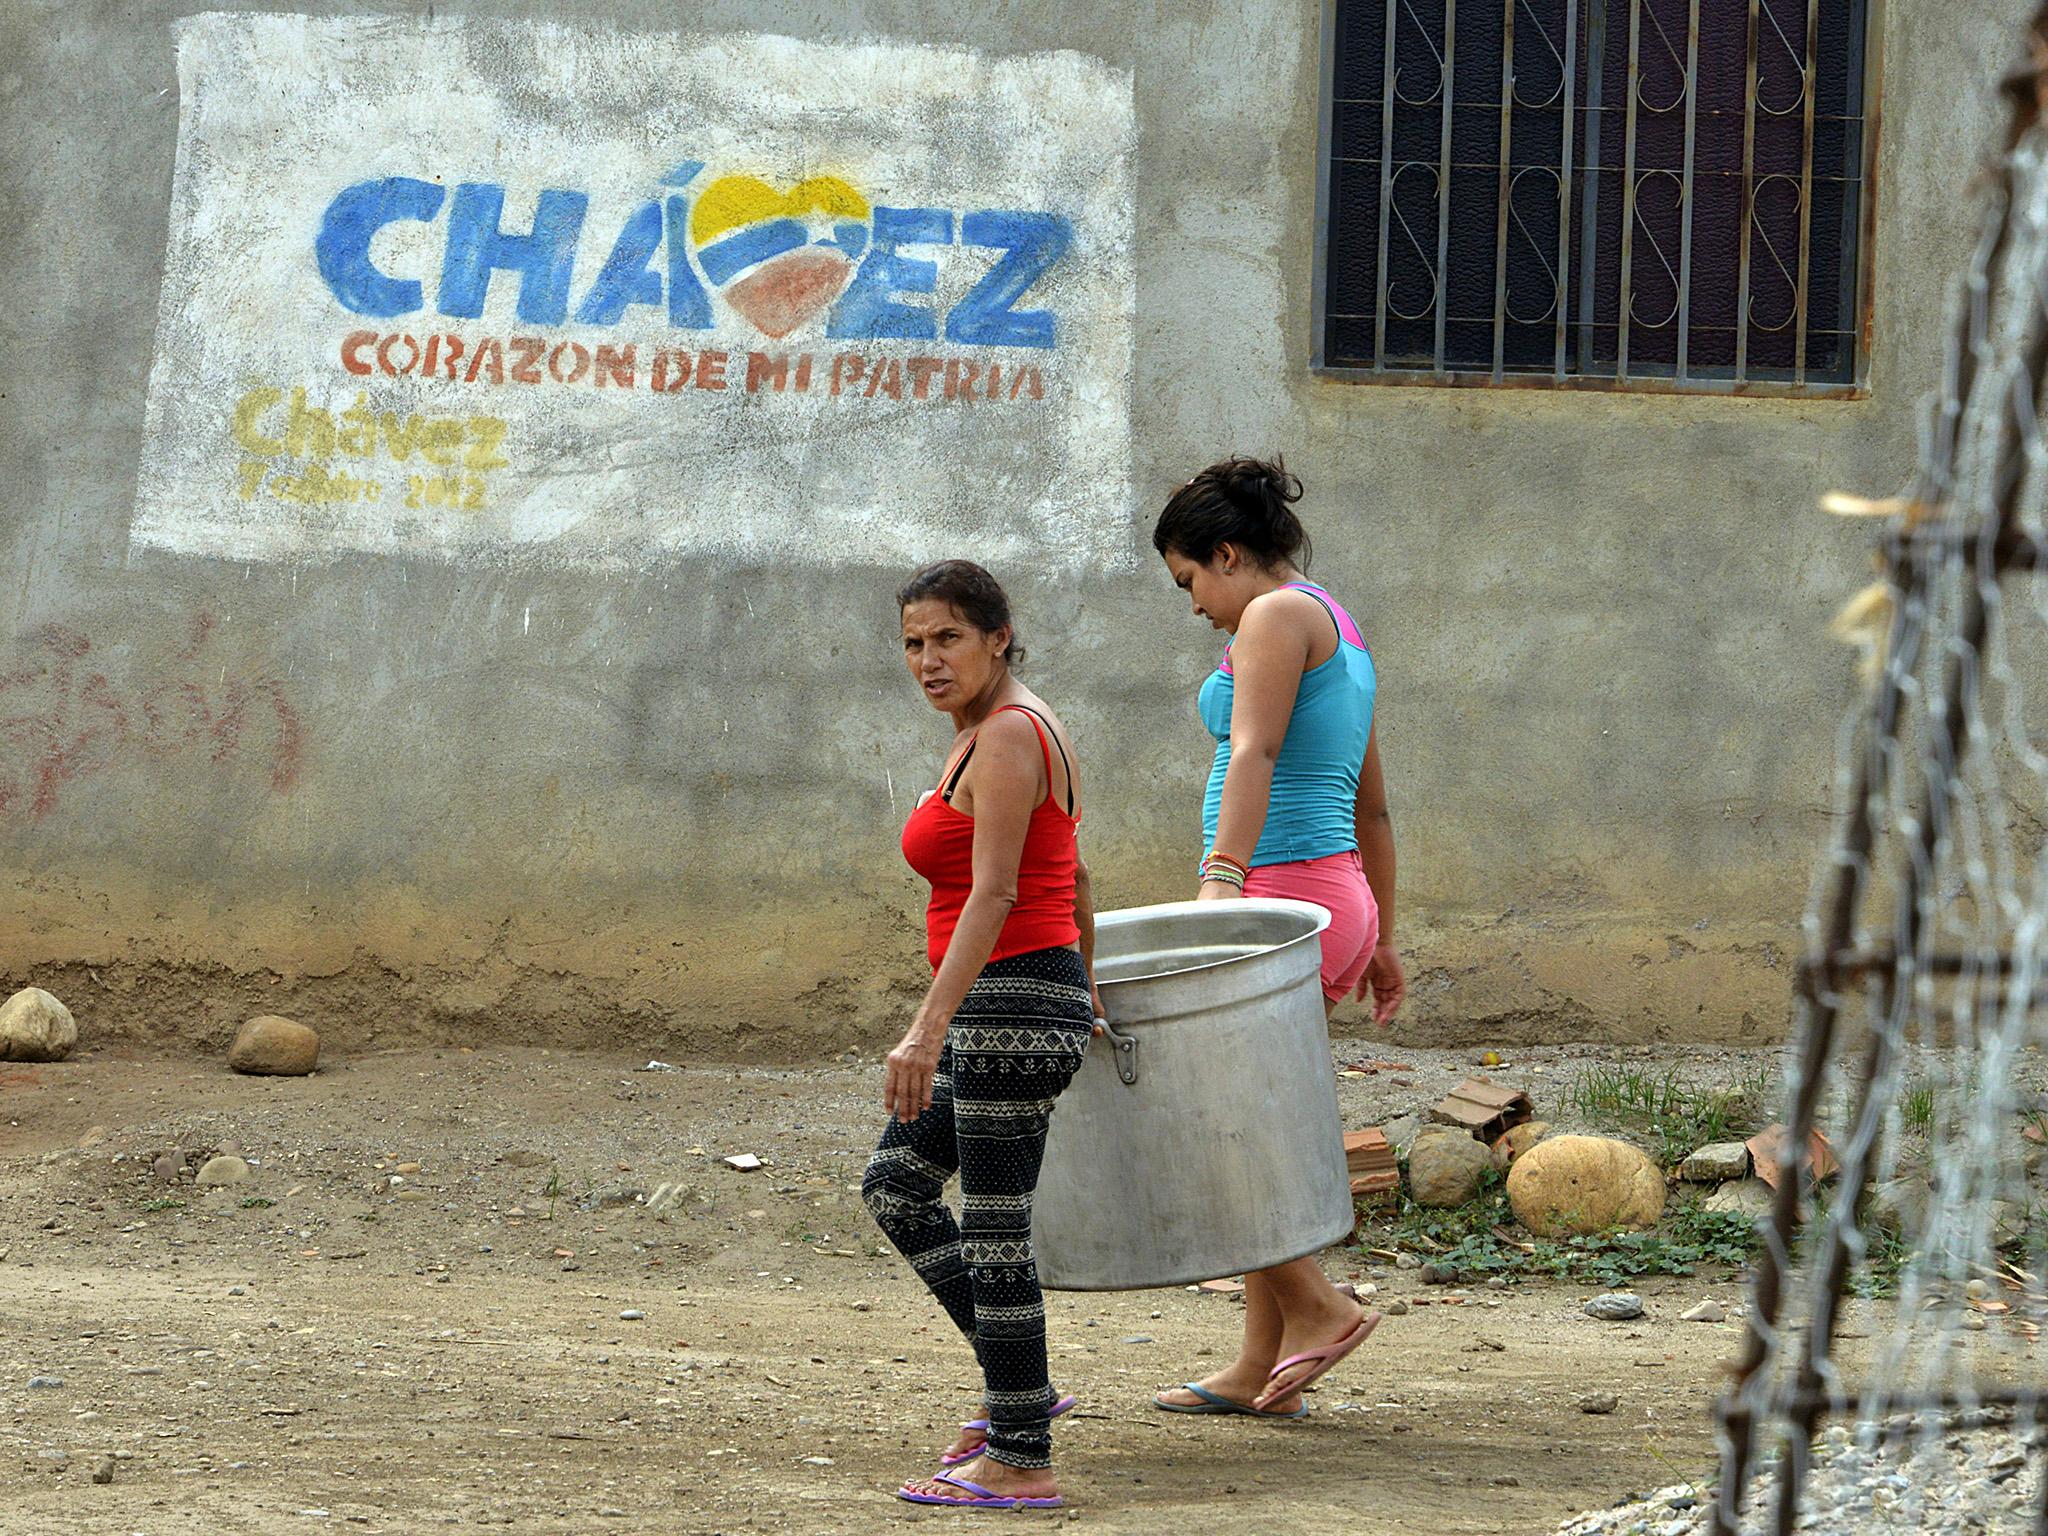 A low-income neigbourhood in western Venezuela last month. Chavez's boom years are now a distant memory